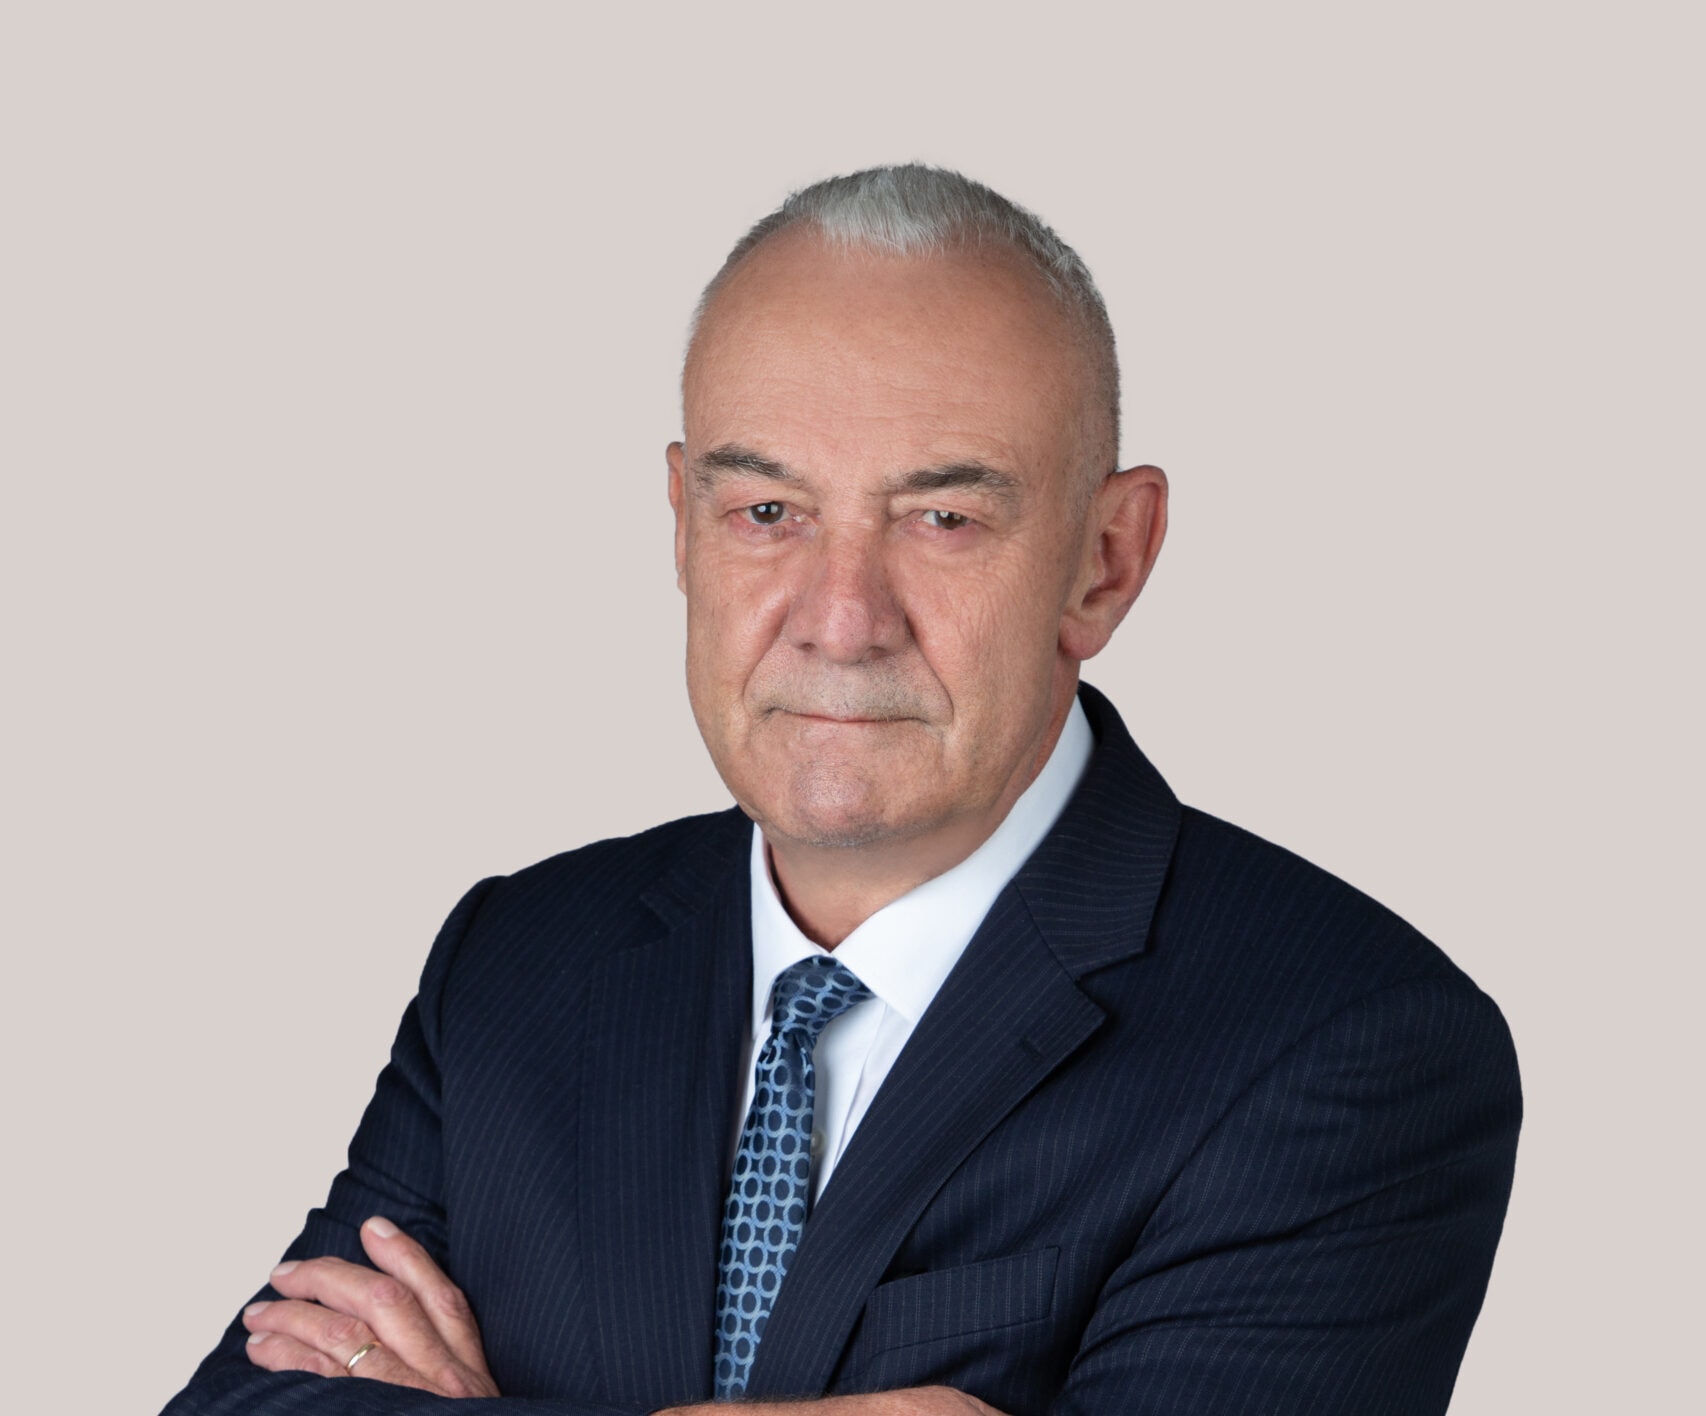 Paul Firmin Family Private Client lawyer, partner at oldham, Li & Nie, Hong Kong